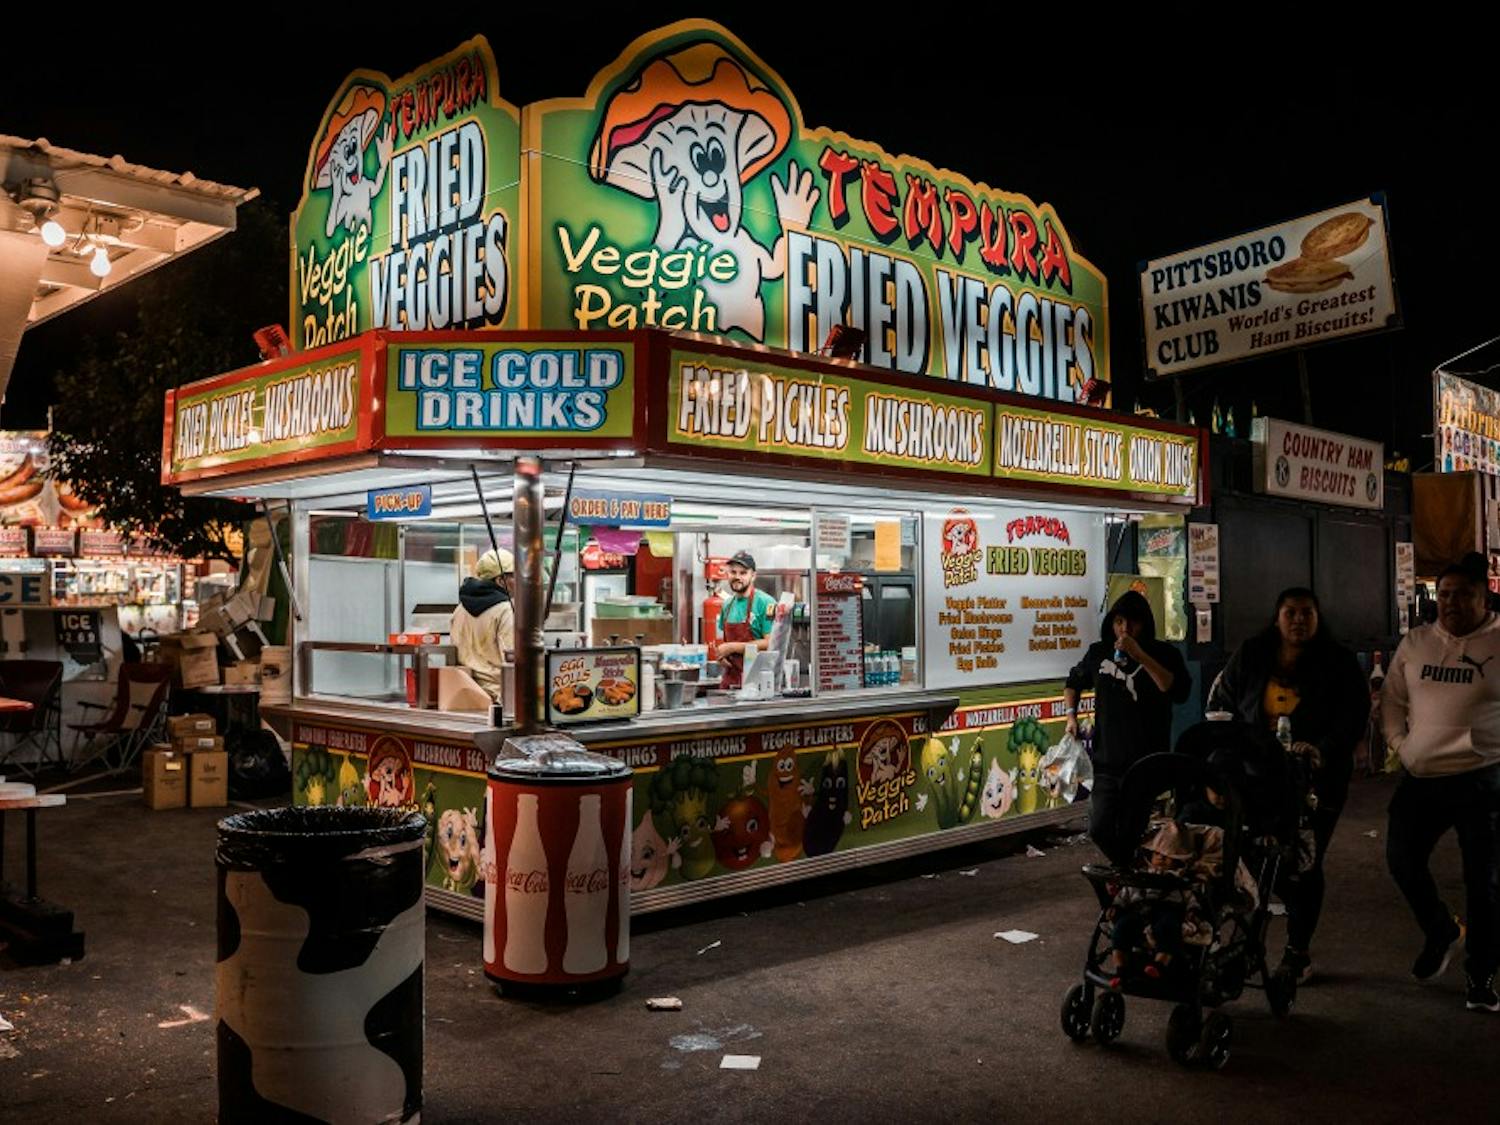 I'm in a state fair state of mind. Come revel in the fried food, fun games, and electrifying rides through Features Photography Editor, Aaron Zhao's best photos. The 2019 NC State Fair runs from October 17th to October 27th.